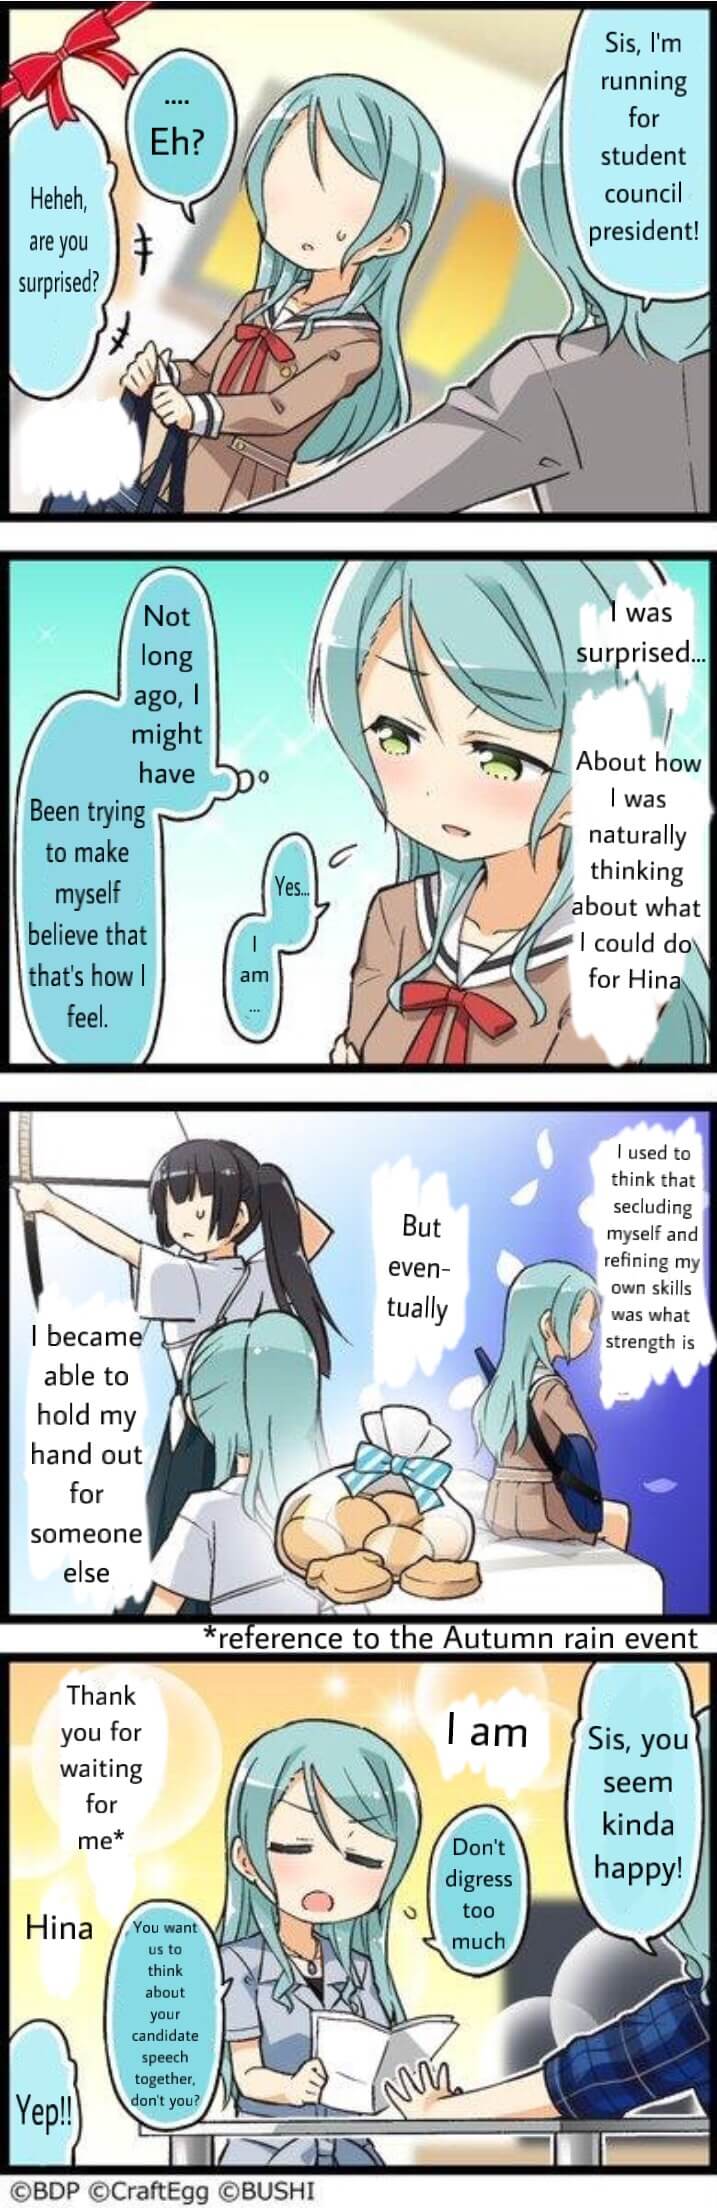 I translated the Sayo bday comic! Please point out any errors, if there are!